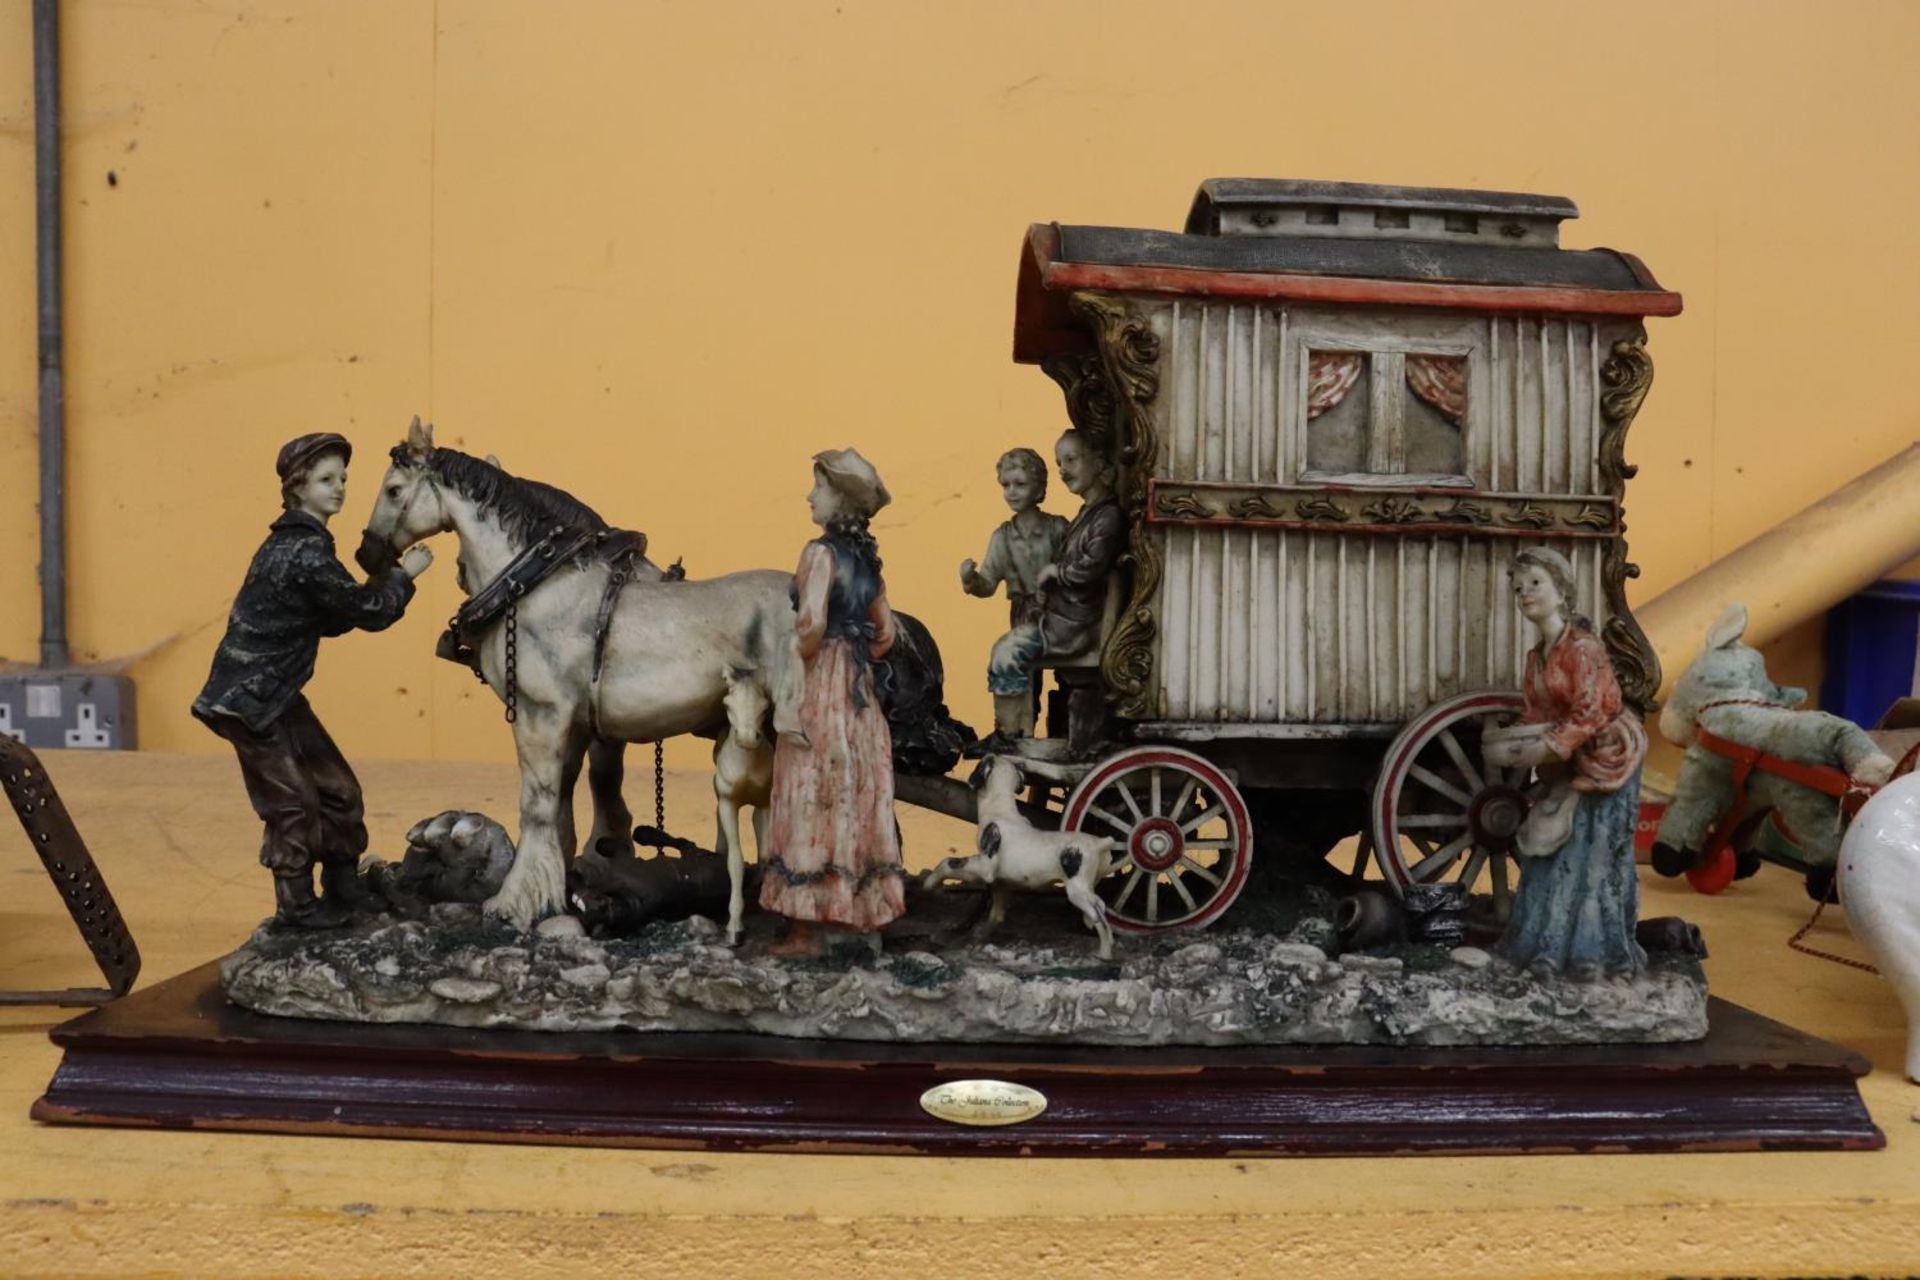 A VERY LARGE 'JULIANA COLLECTION' MODEL OF A ROMANY CARAVAN, HORSES AND FIGURES, ON A WOODEN BASE,